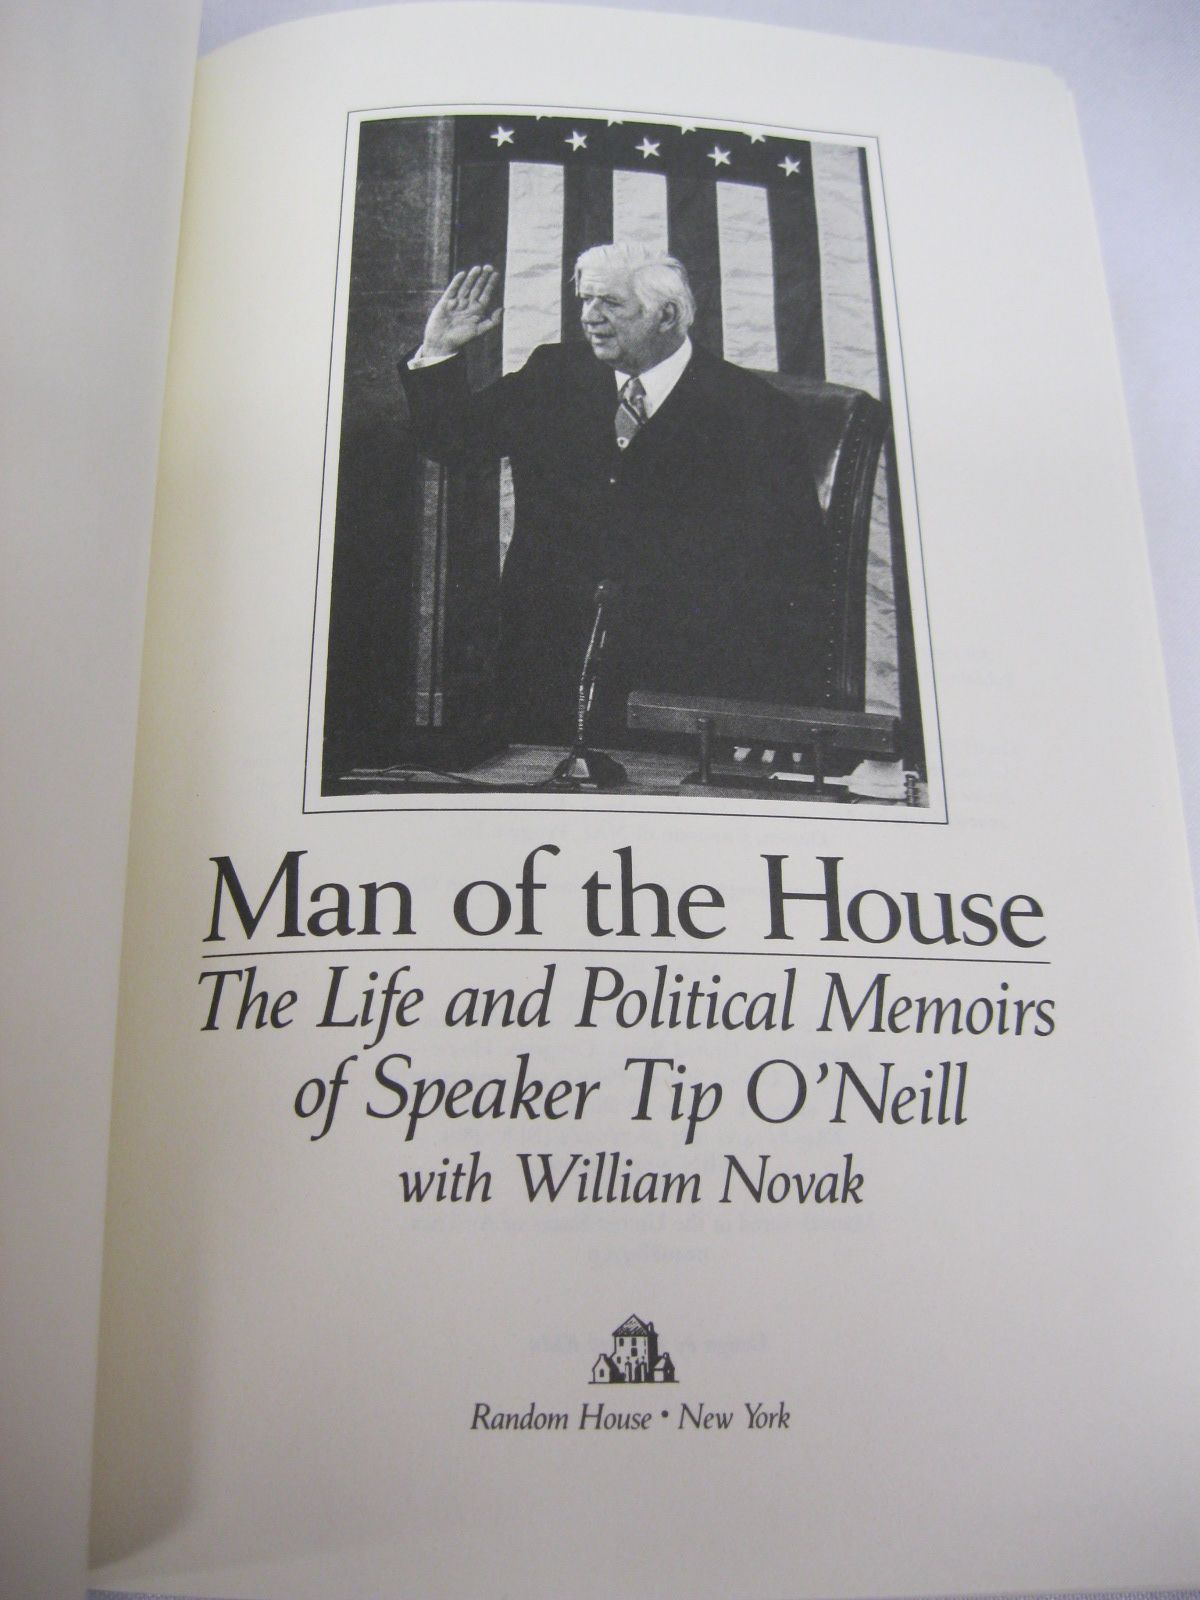 Man of the House: The Life and Political Memoirs by Tip O'Neill